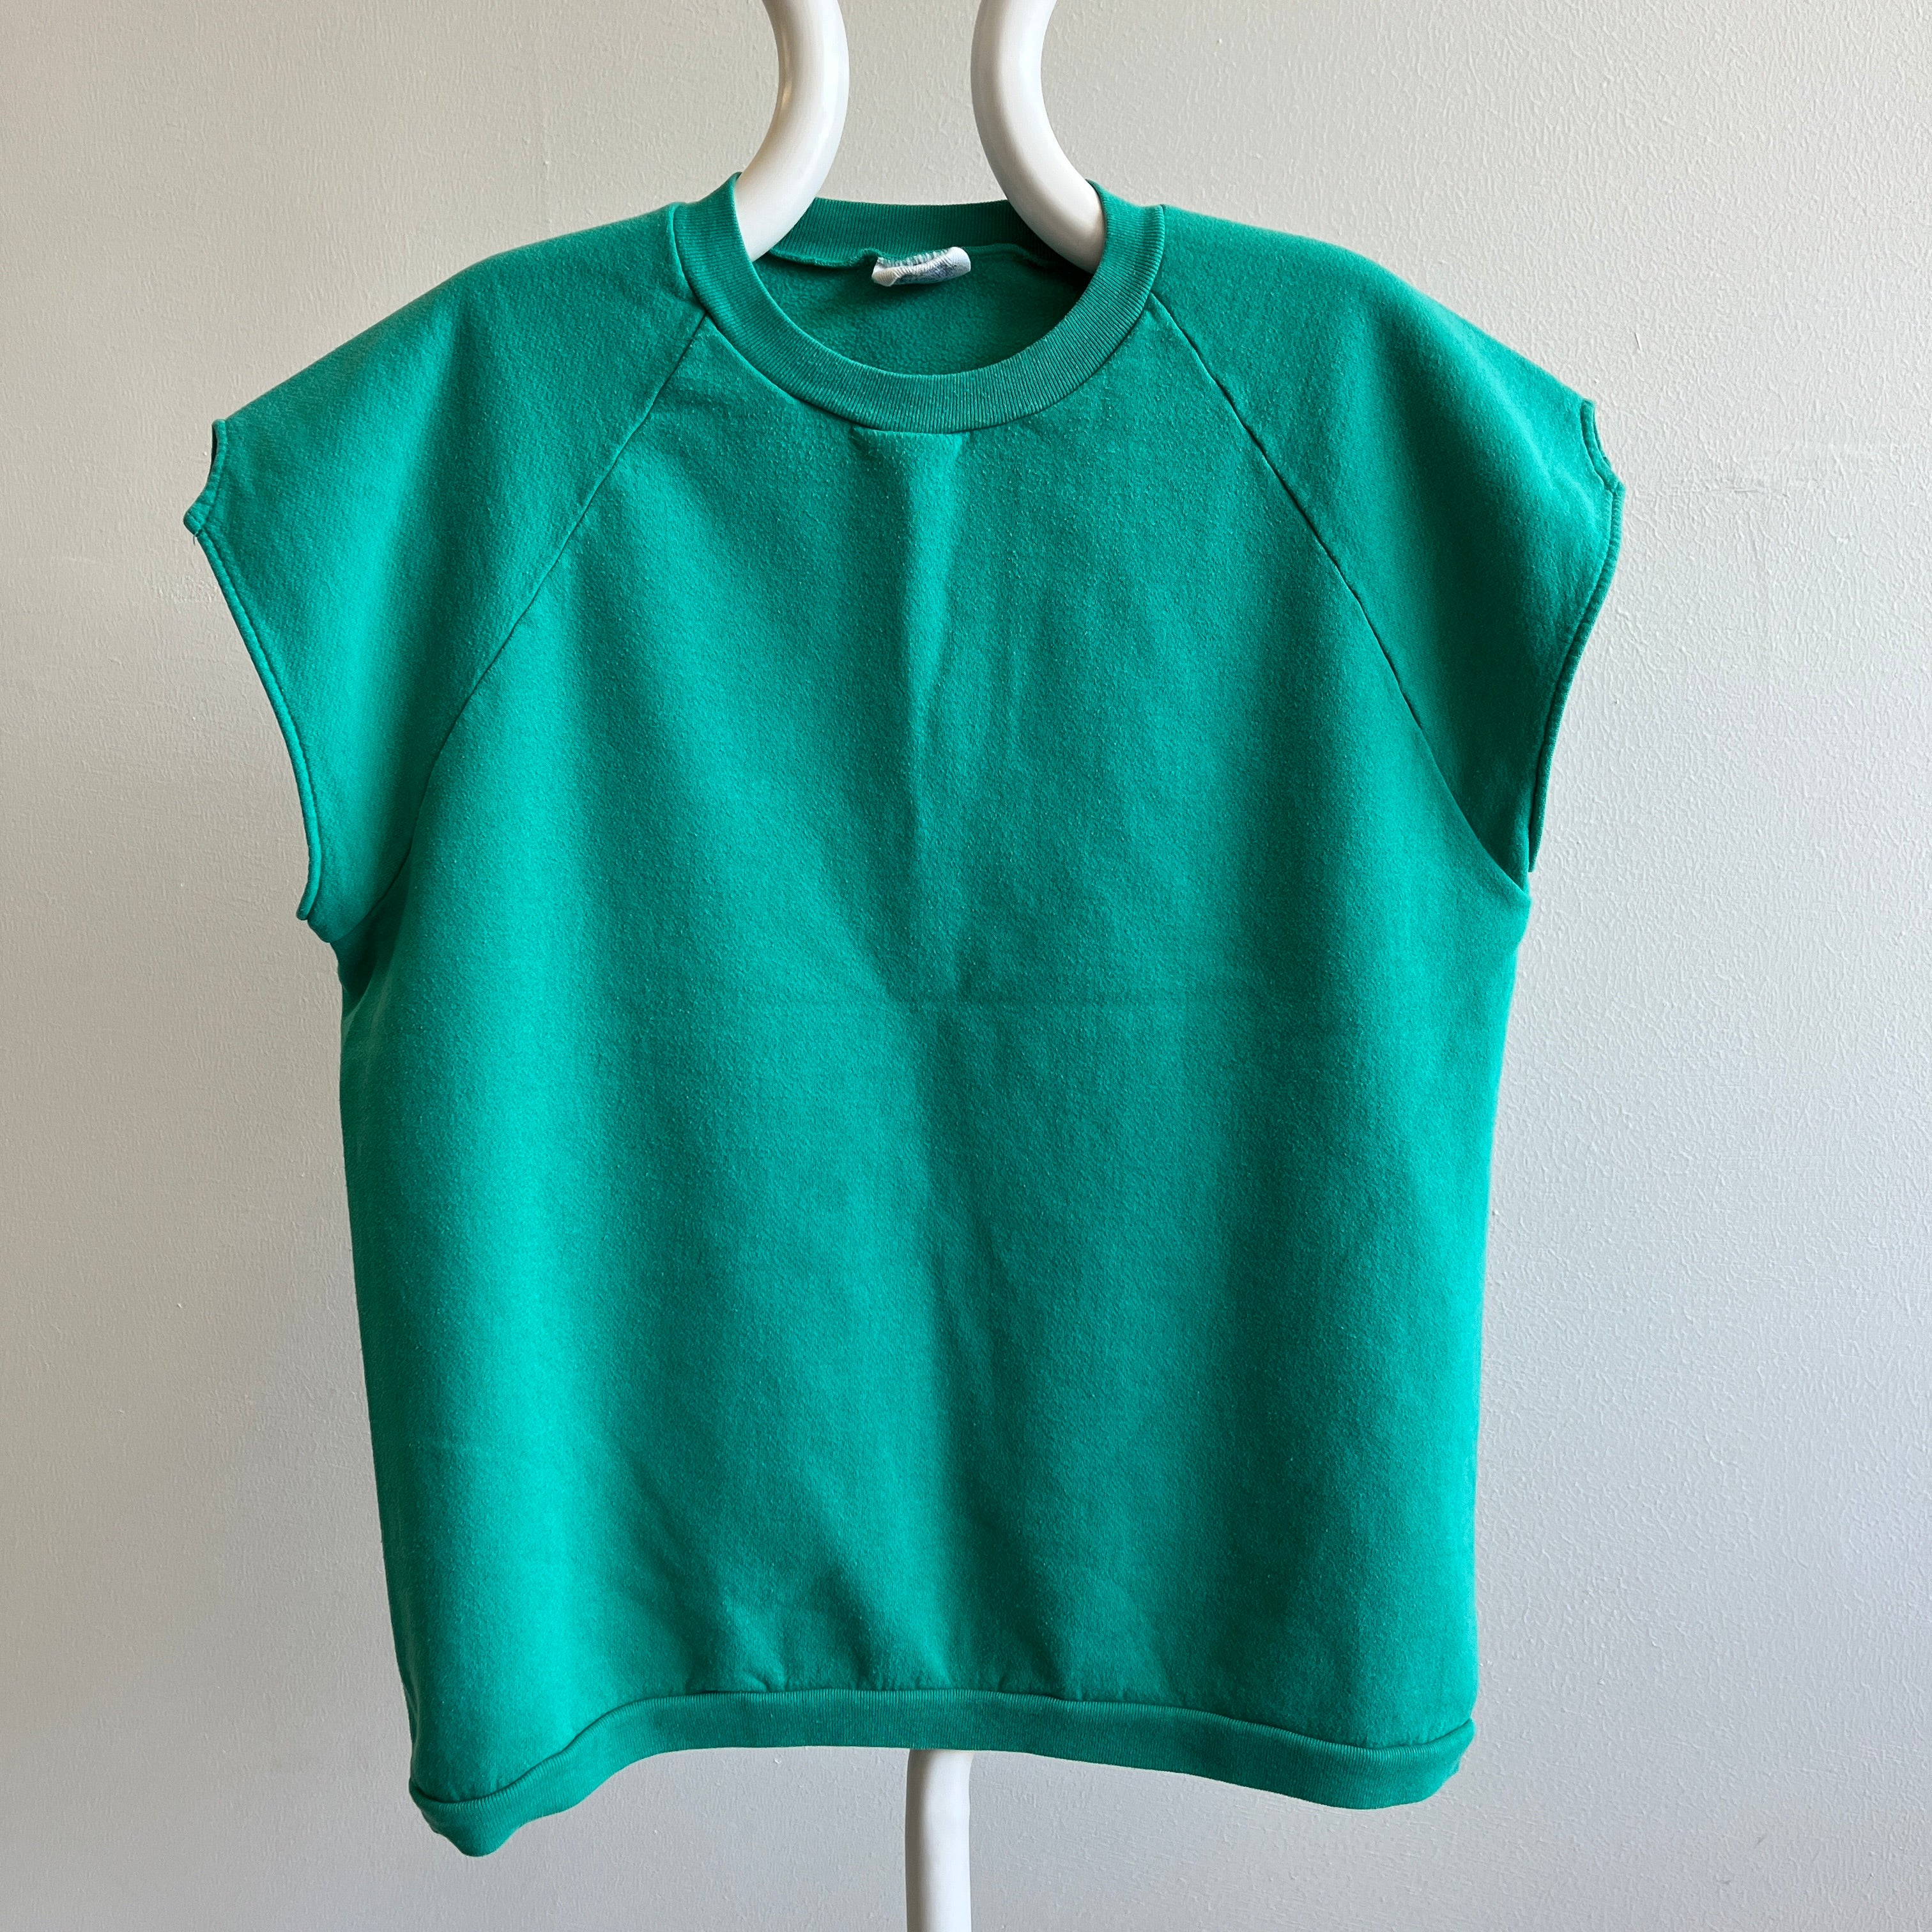 1990s Wright Teal/Green Muscle Tank Warm Up